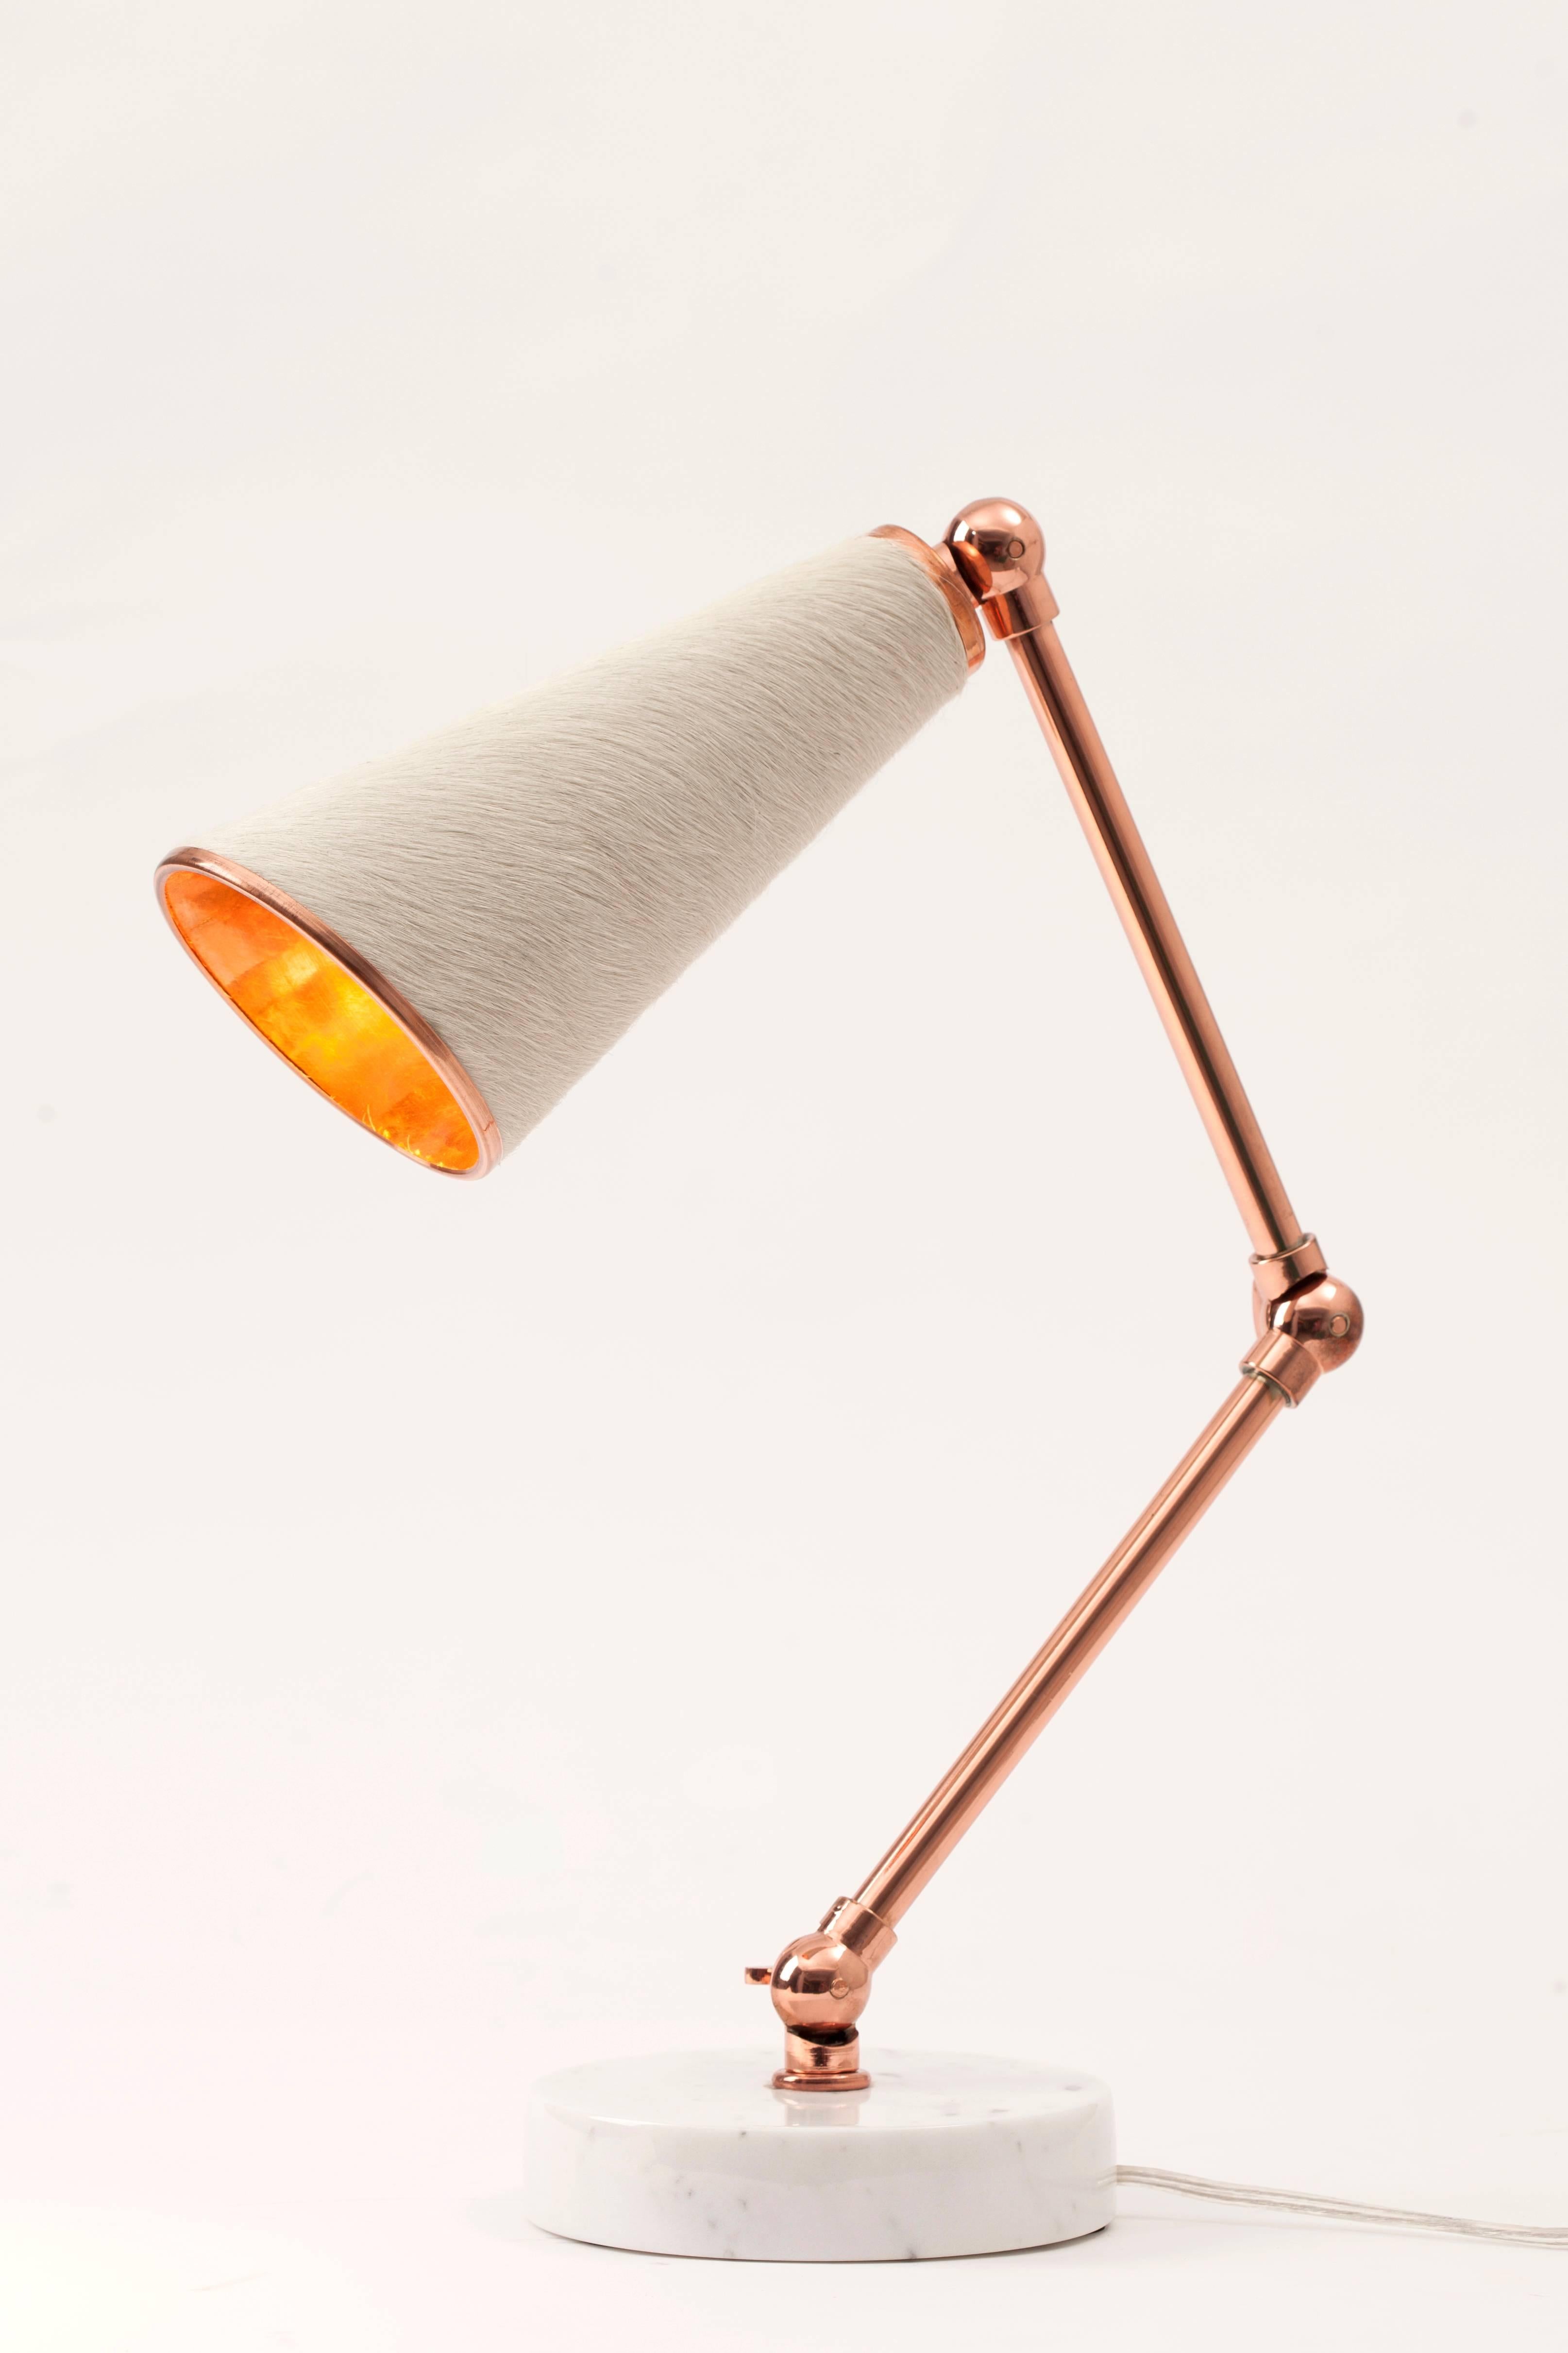 Lanterna is a new age robot lamp with a heart. Unique textured materials such as felt, cork and cowhide are combined with white and black colored marbles and shiny metals such as brass and copper. Adjustable arms of Lanterna enables users to justify